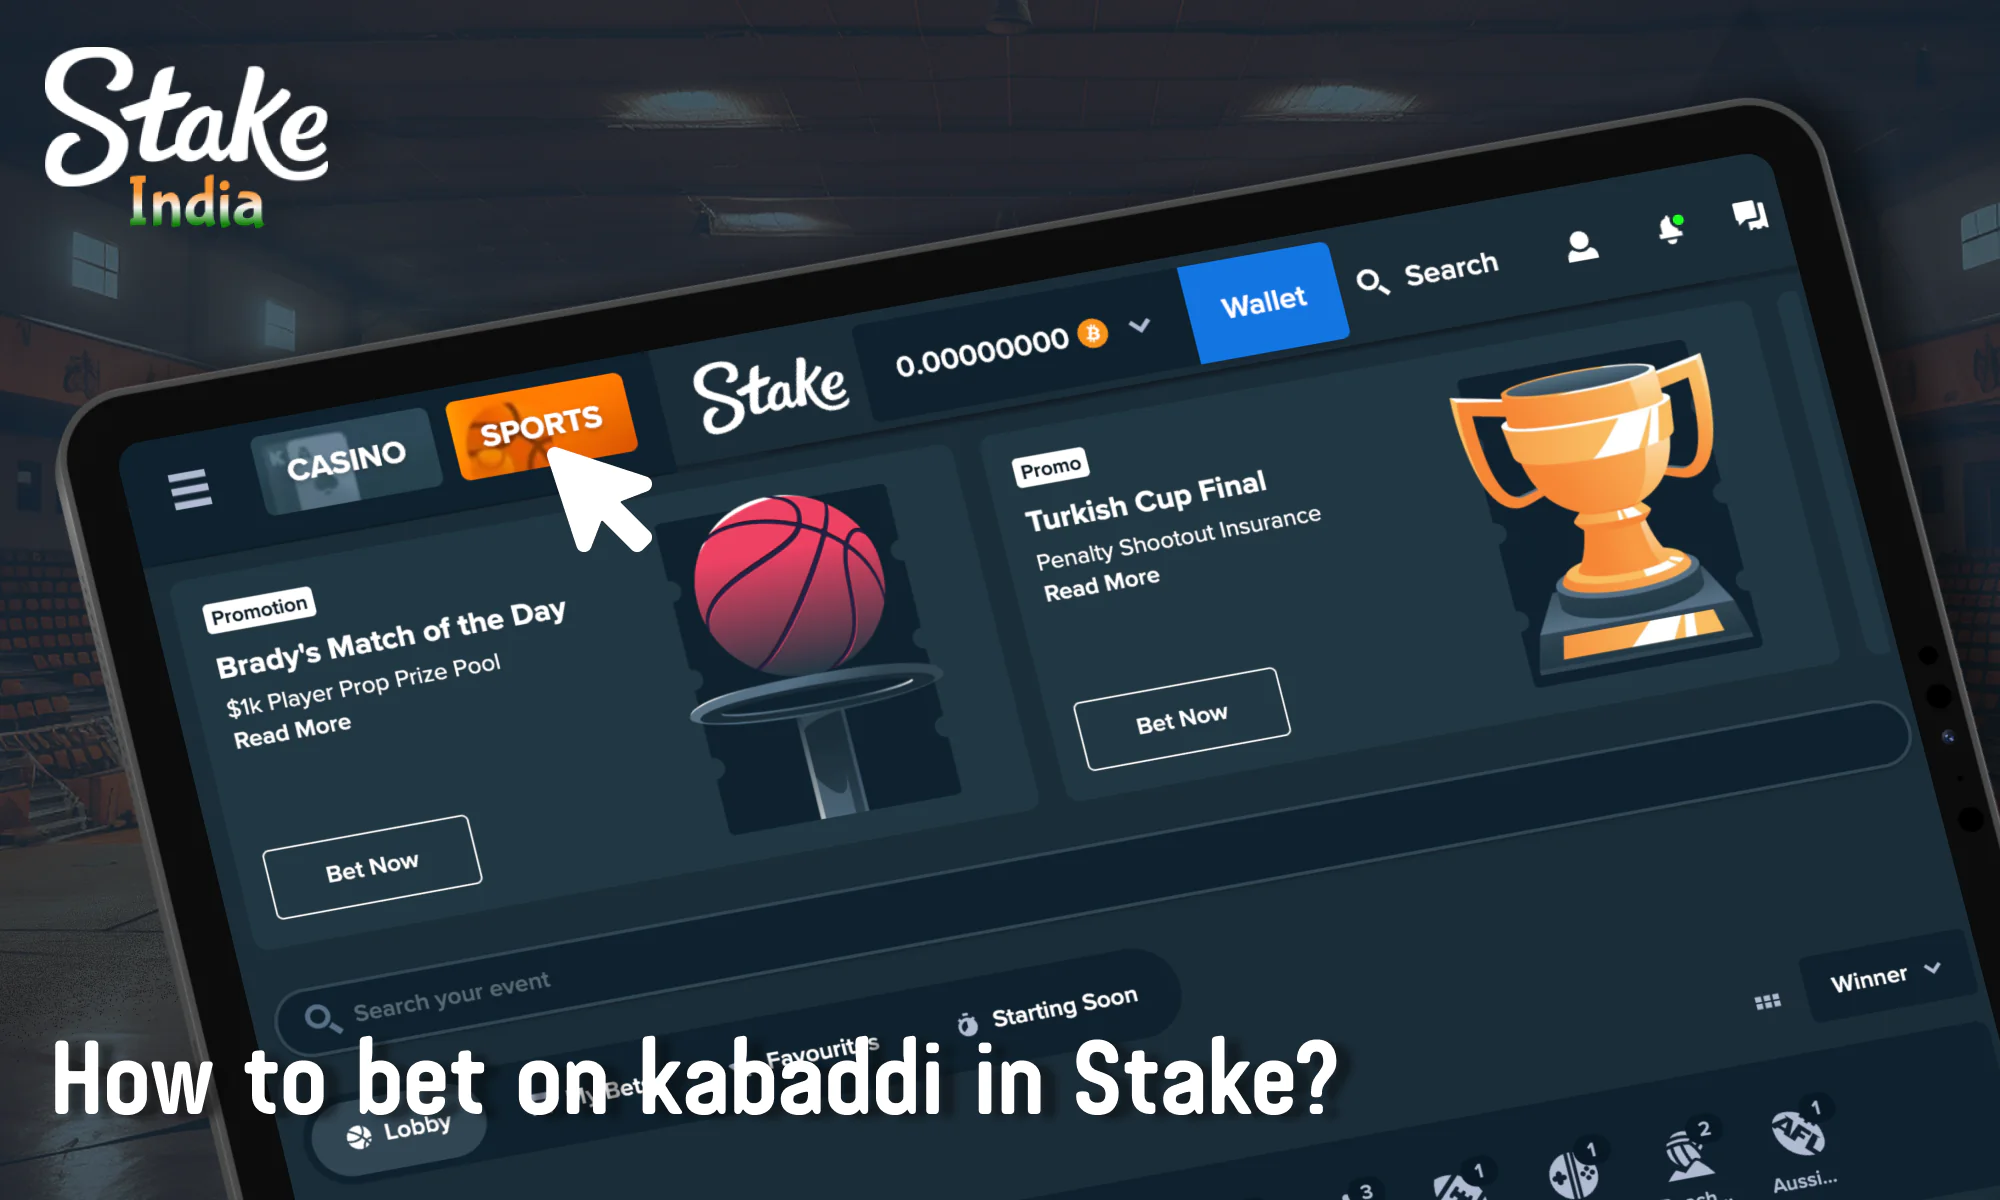 How to bet on Kabaddi in Stake India